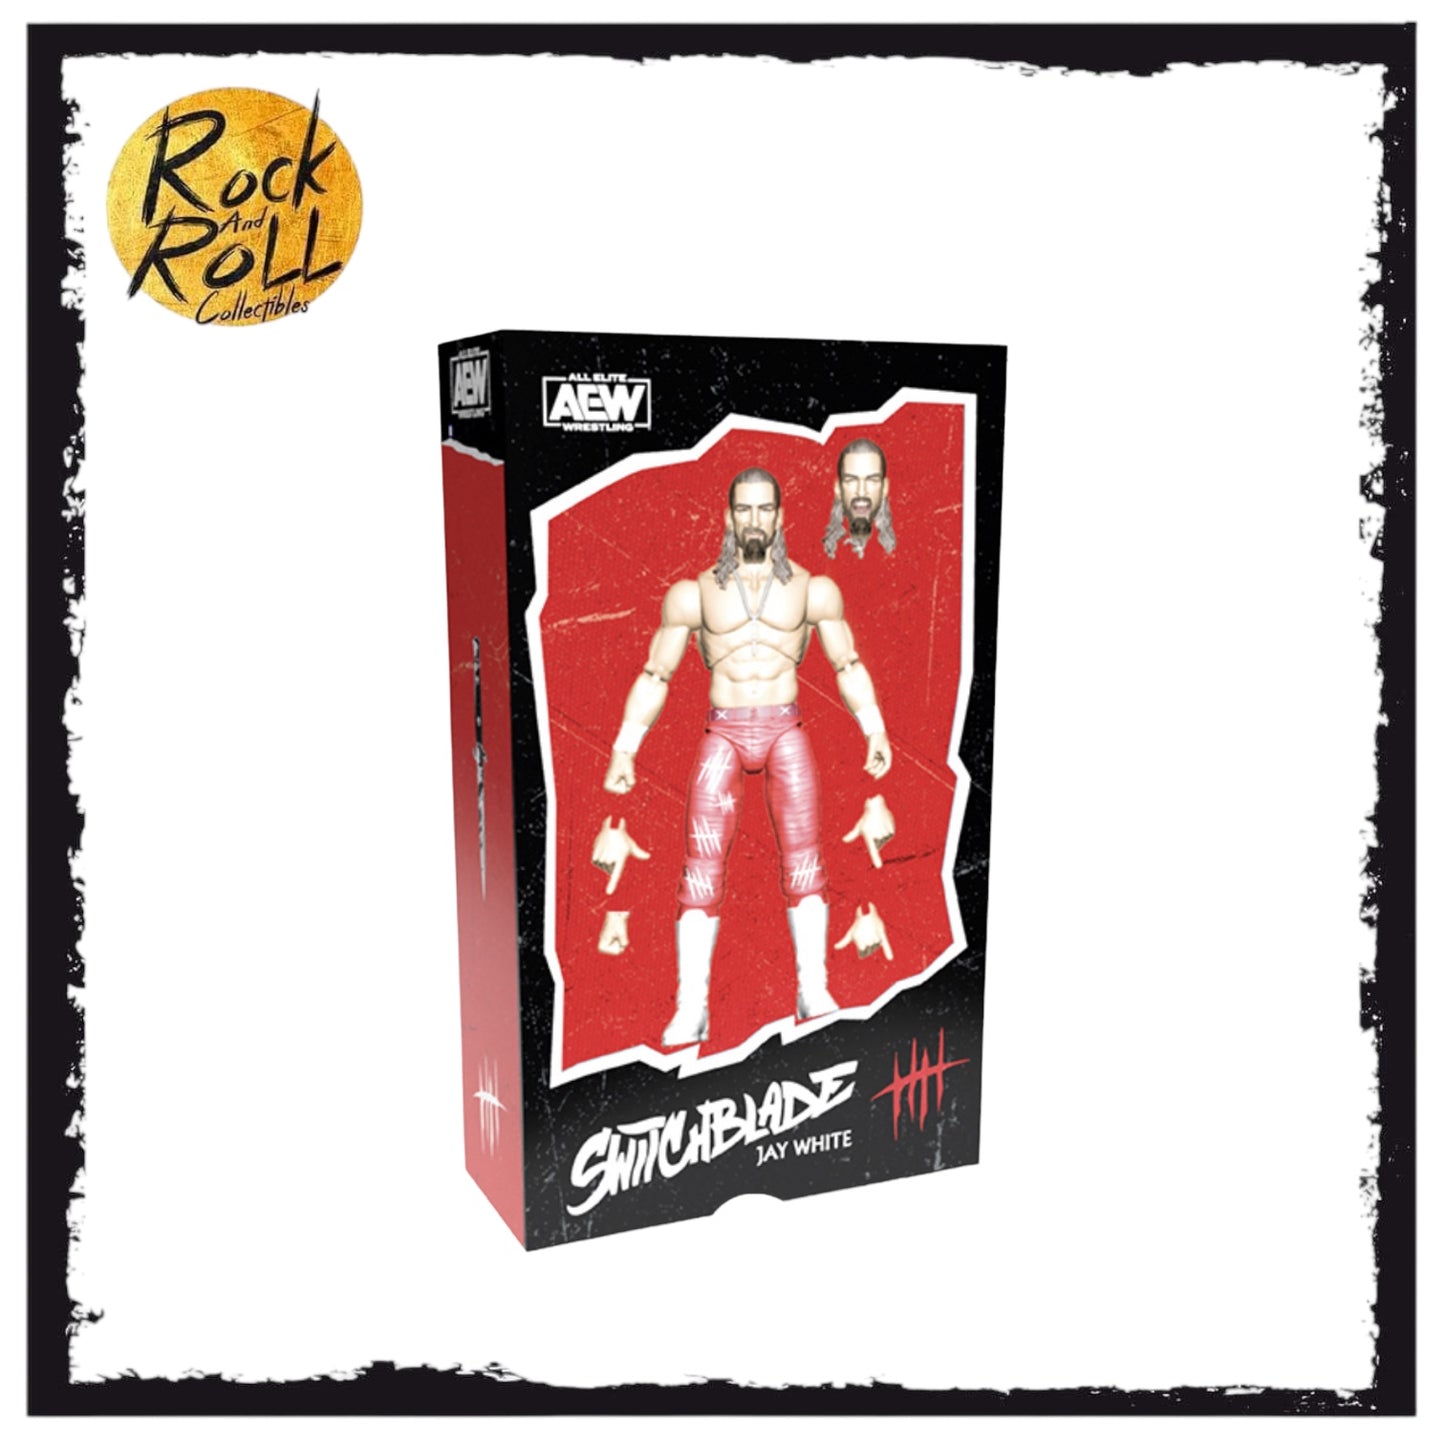 Switchblade Jay White - AEW Ringside Exclusive - PRE ORDER